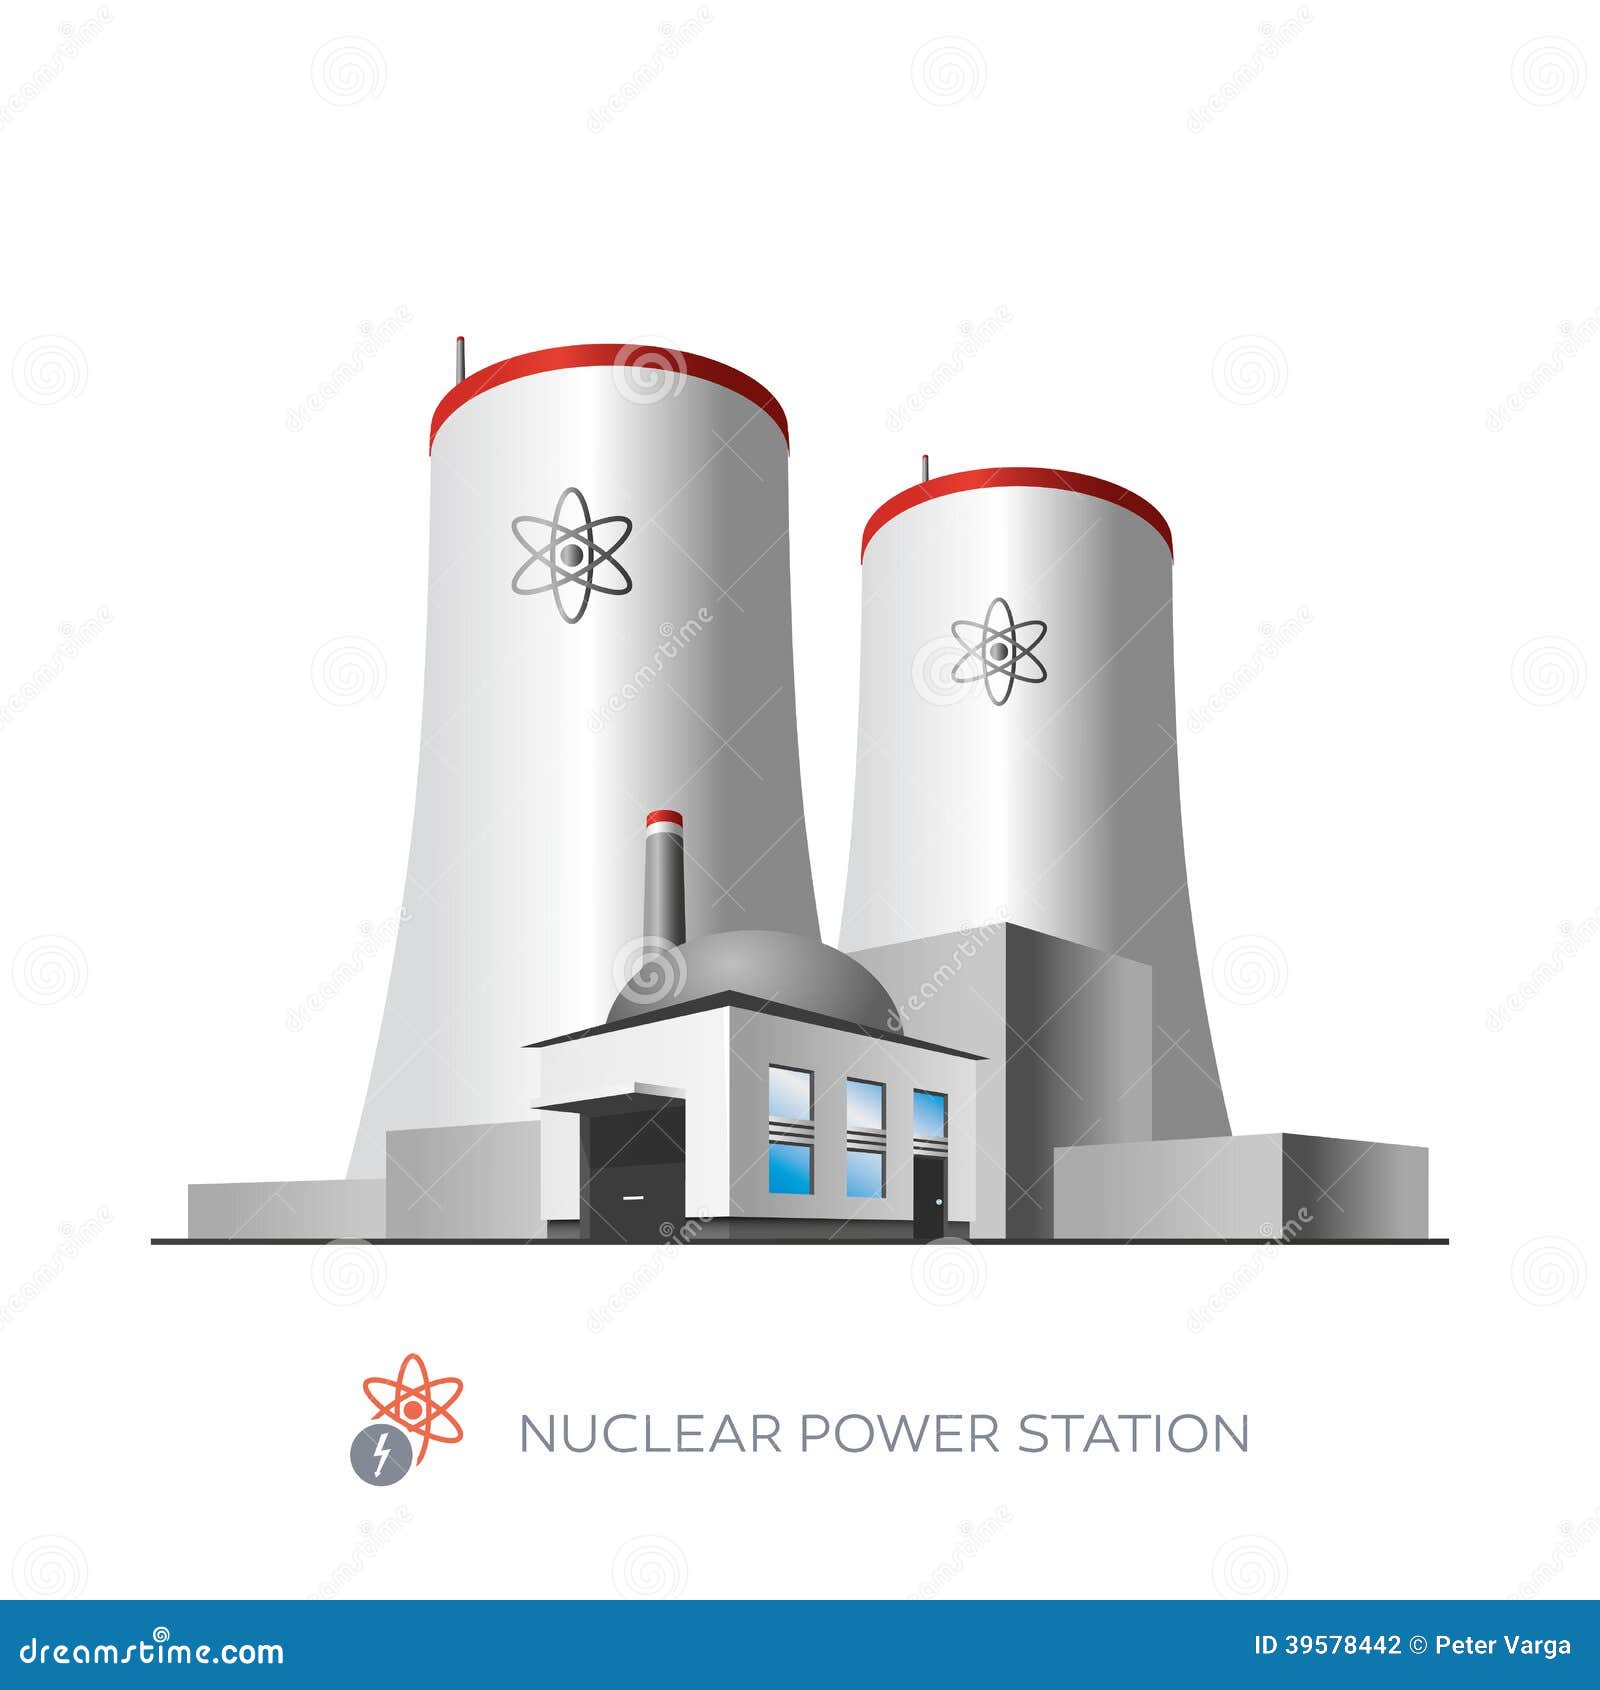 clipart of nuclear power plant - photo #32